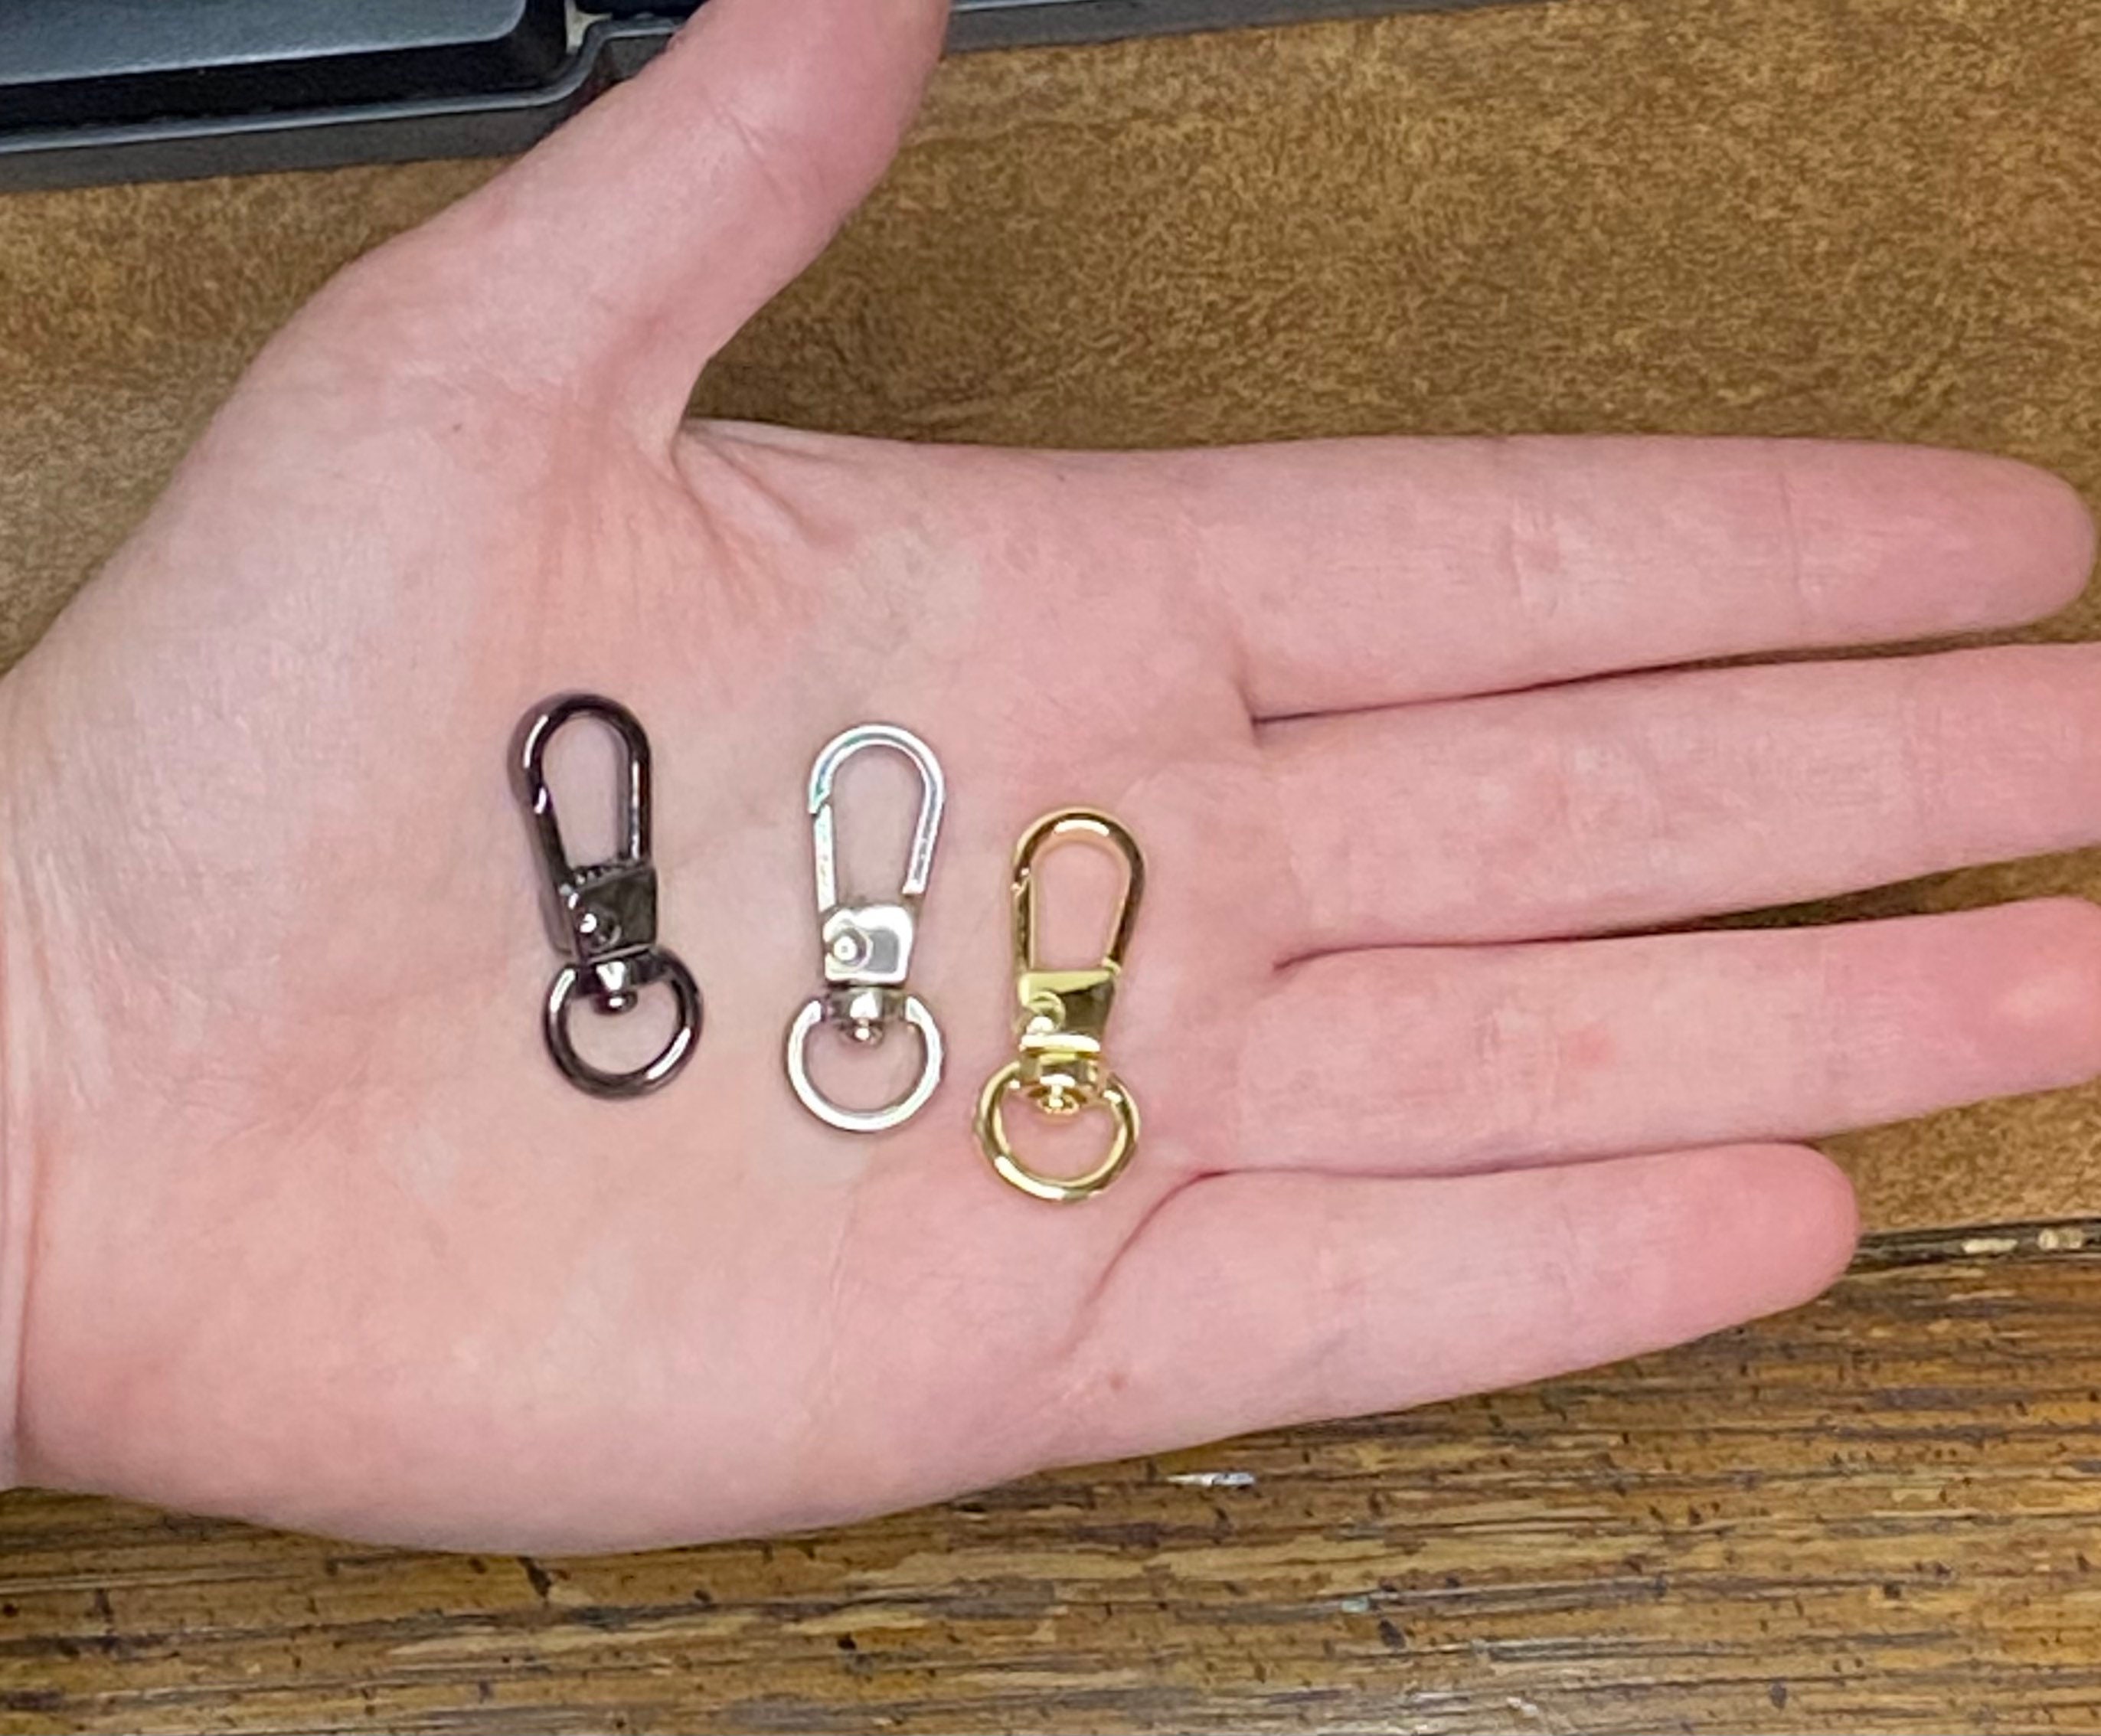 5, 10, or 15 Small Swivel Lobster Claw Clasps, Gold, Gunmetal, Silver  Platinum, Swivel Hooks, Alloy, 13x32mm, Strong Keychain quality Check -   Norway